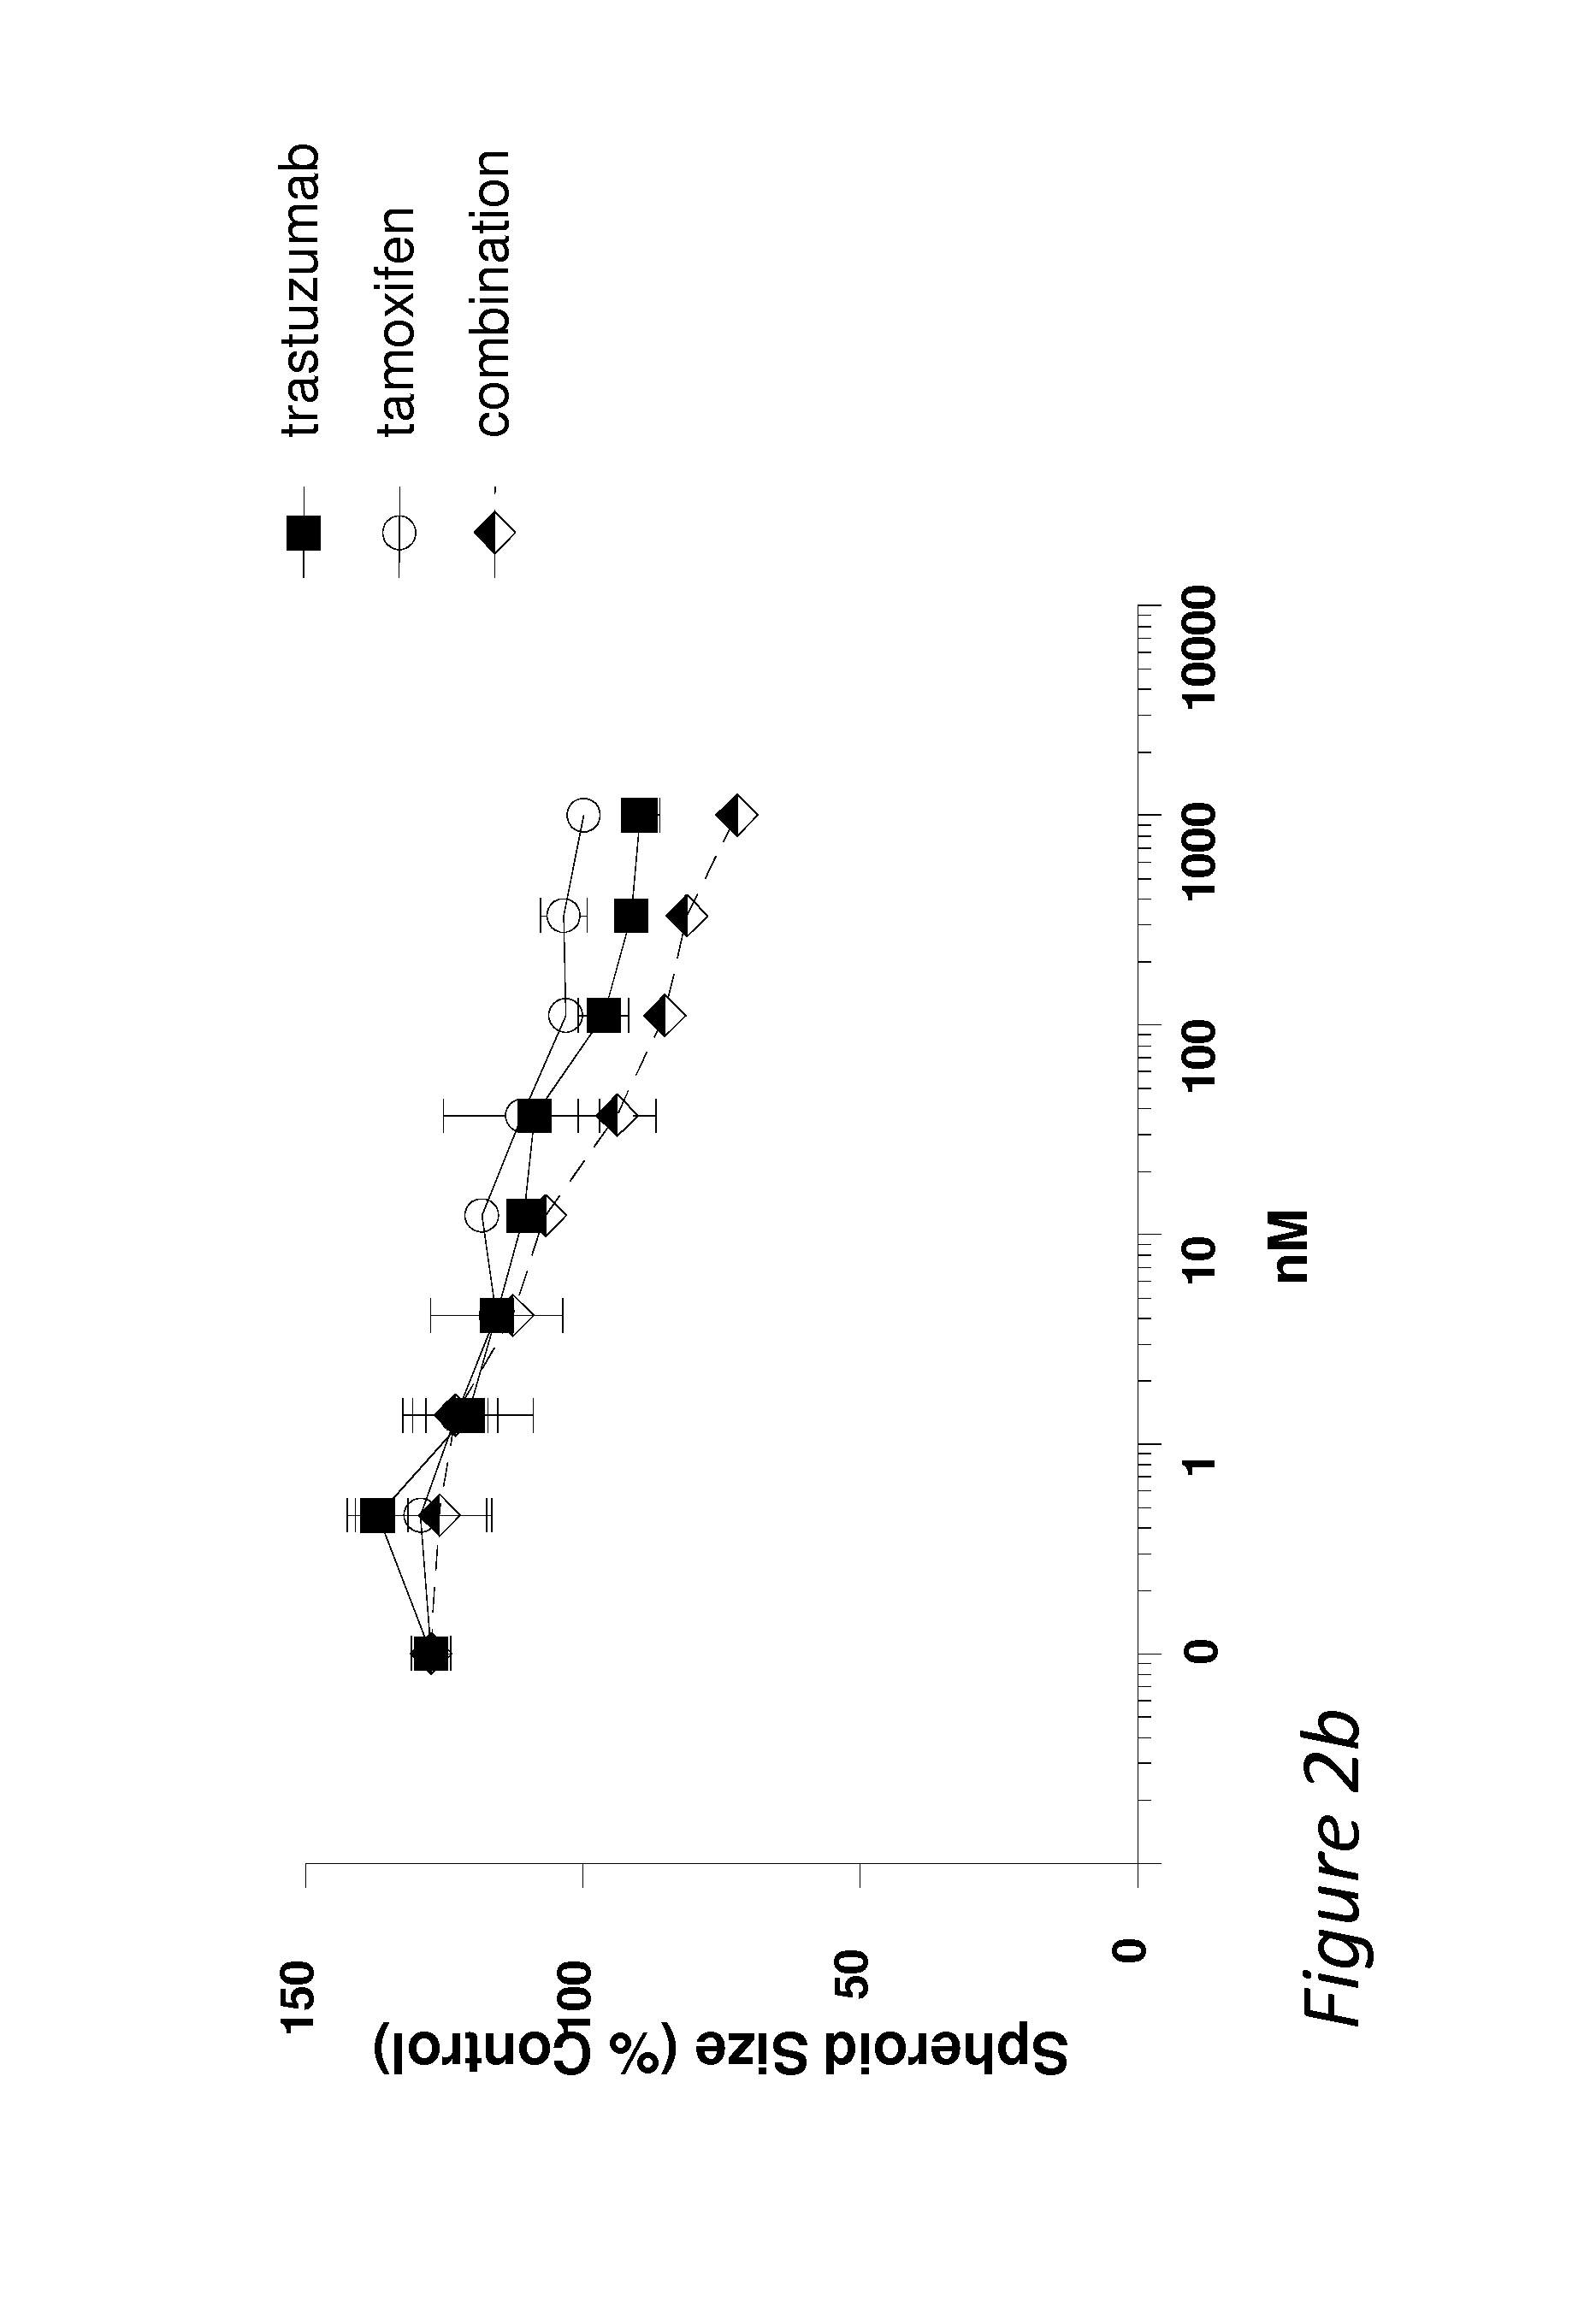 Combination therapies comprising Anti-erbb3 agents